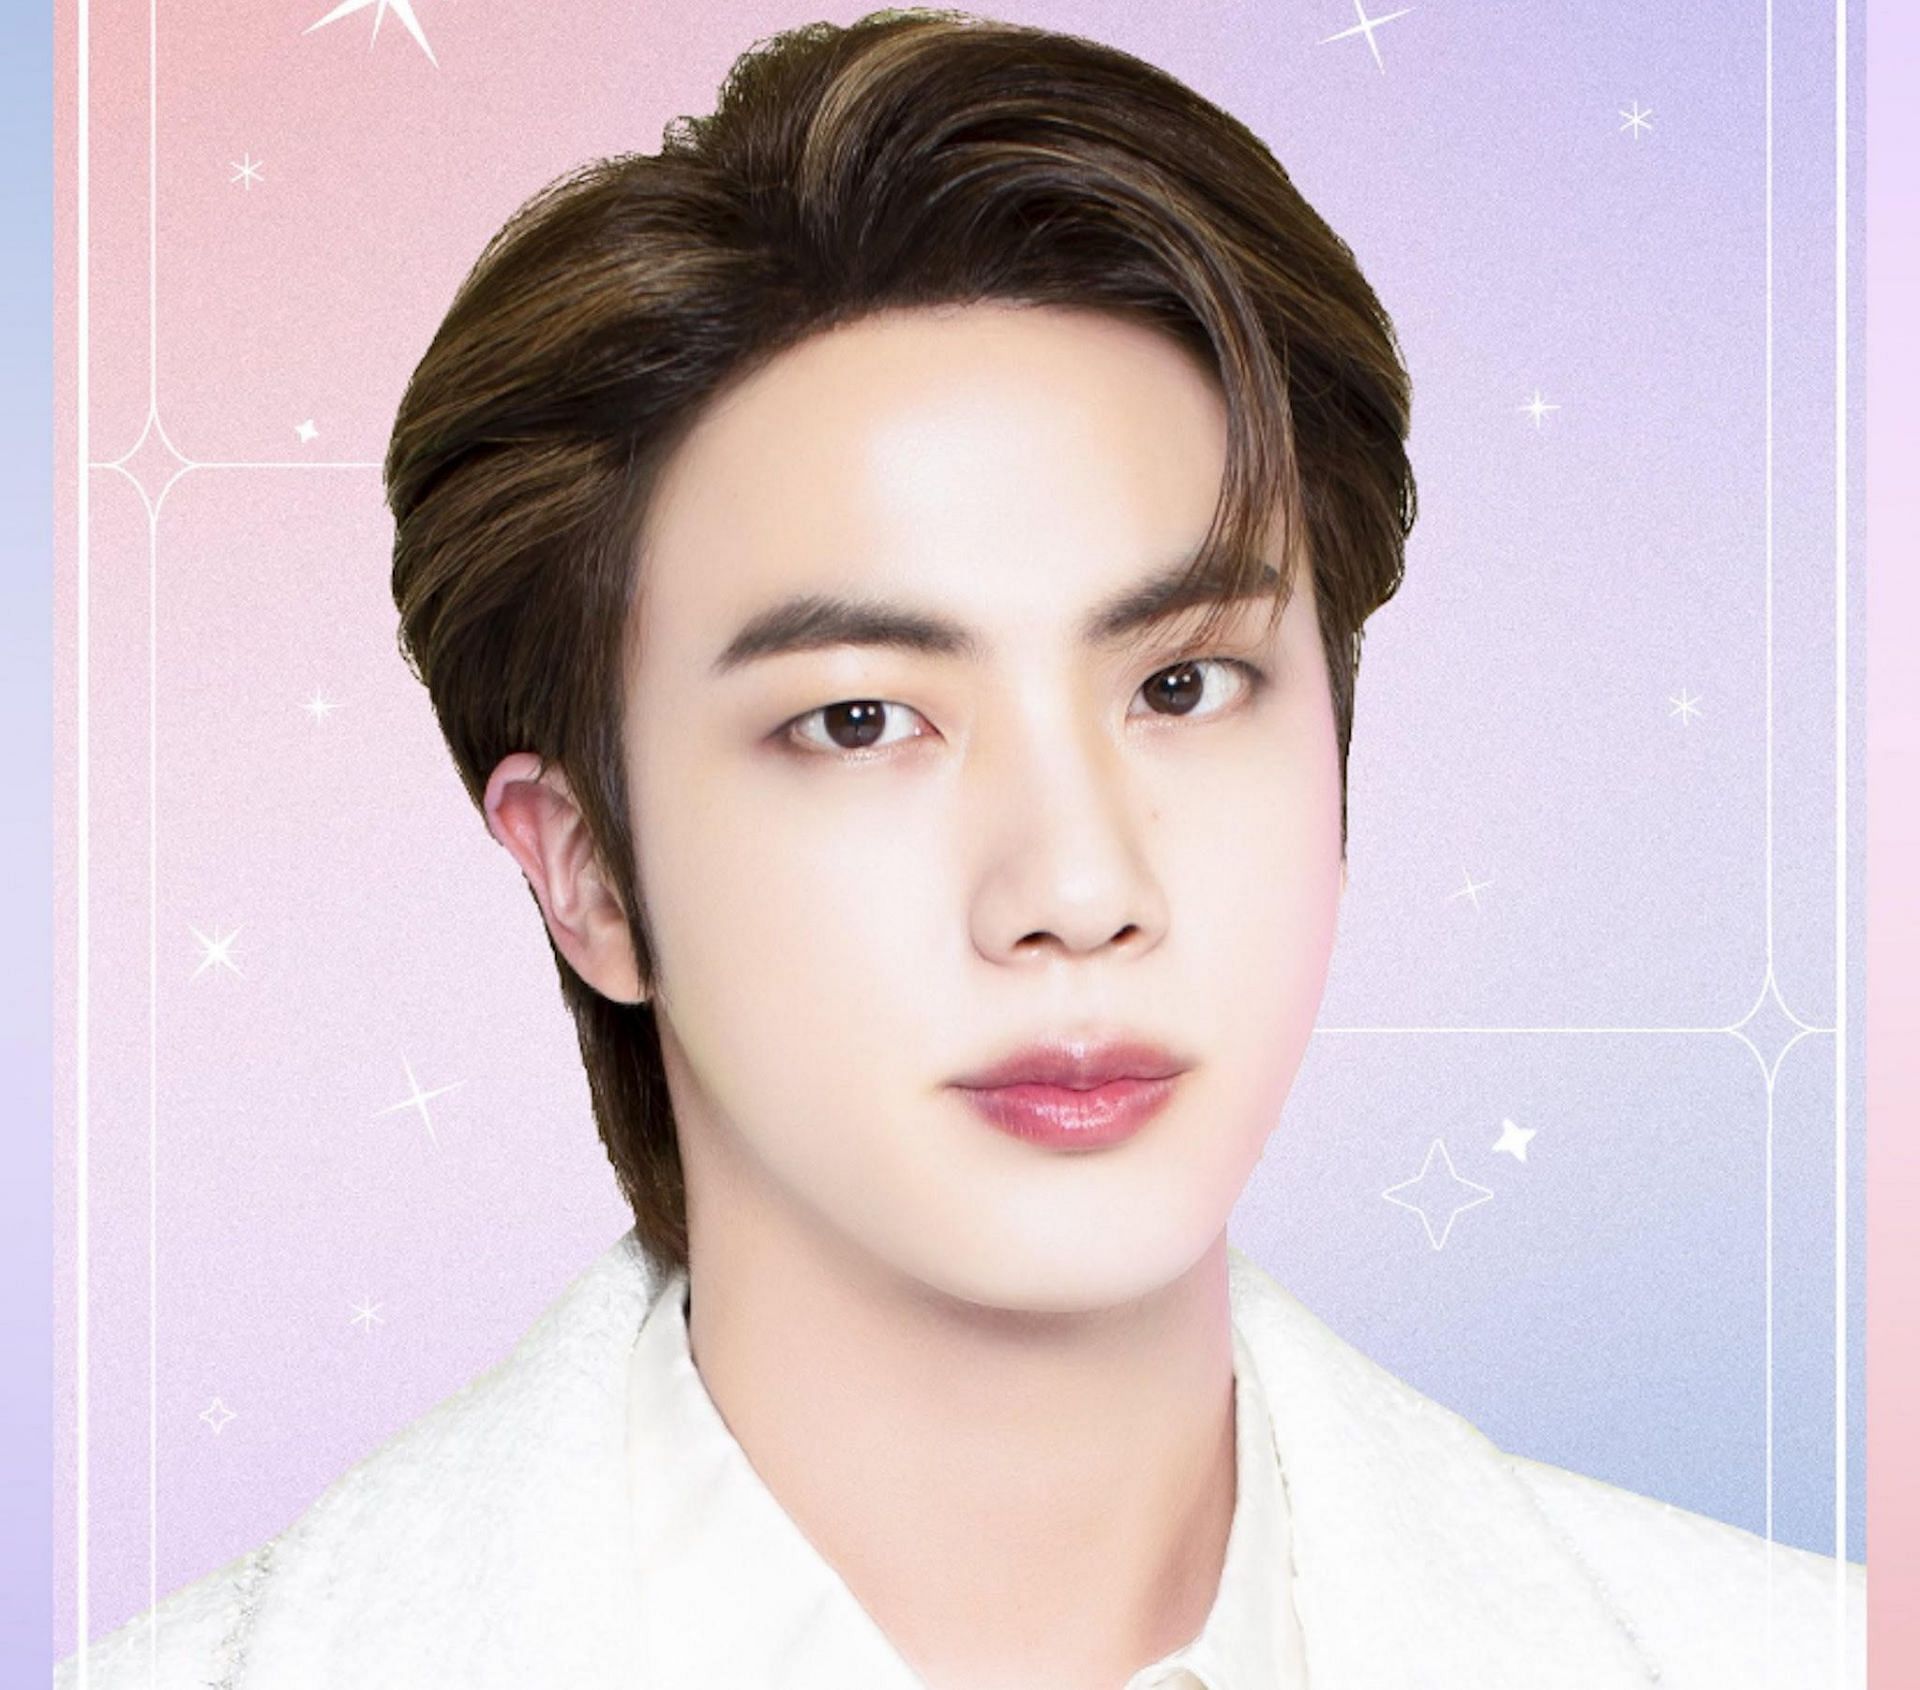 These 30+ Pics Prove BTS's Jin Is Mr. Worldwide Handsome In